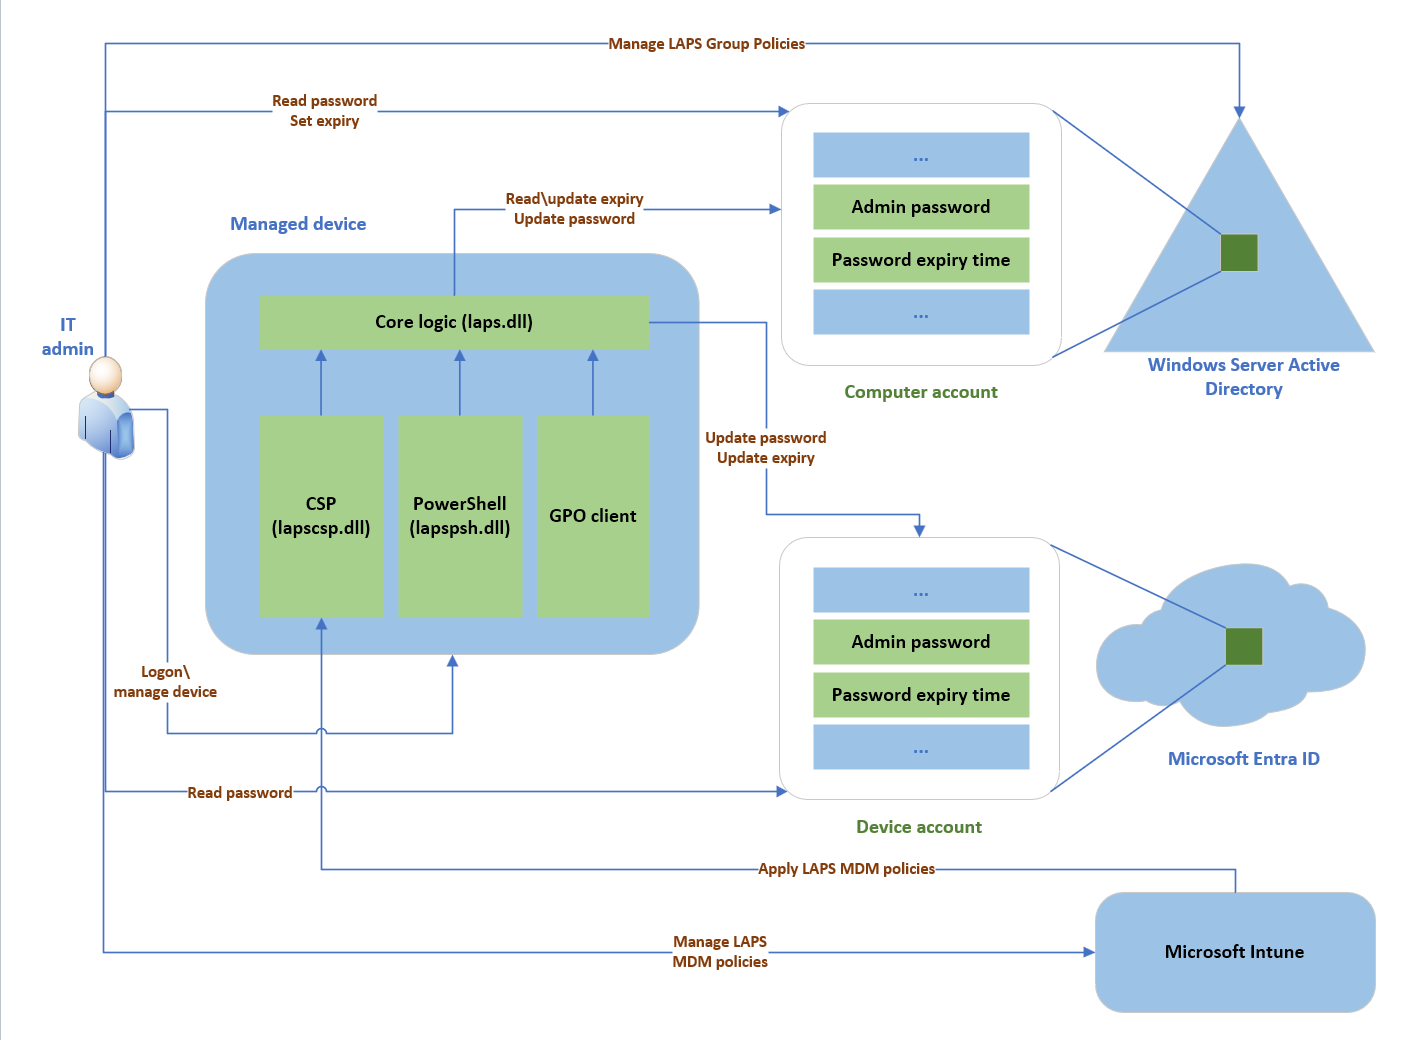 Diagram of Windows LAPS architecture that shows the managed device, Microsoft Entra ID, and Windows Server Active Directory.